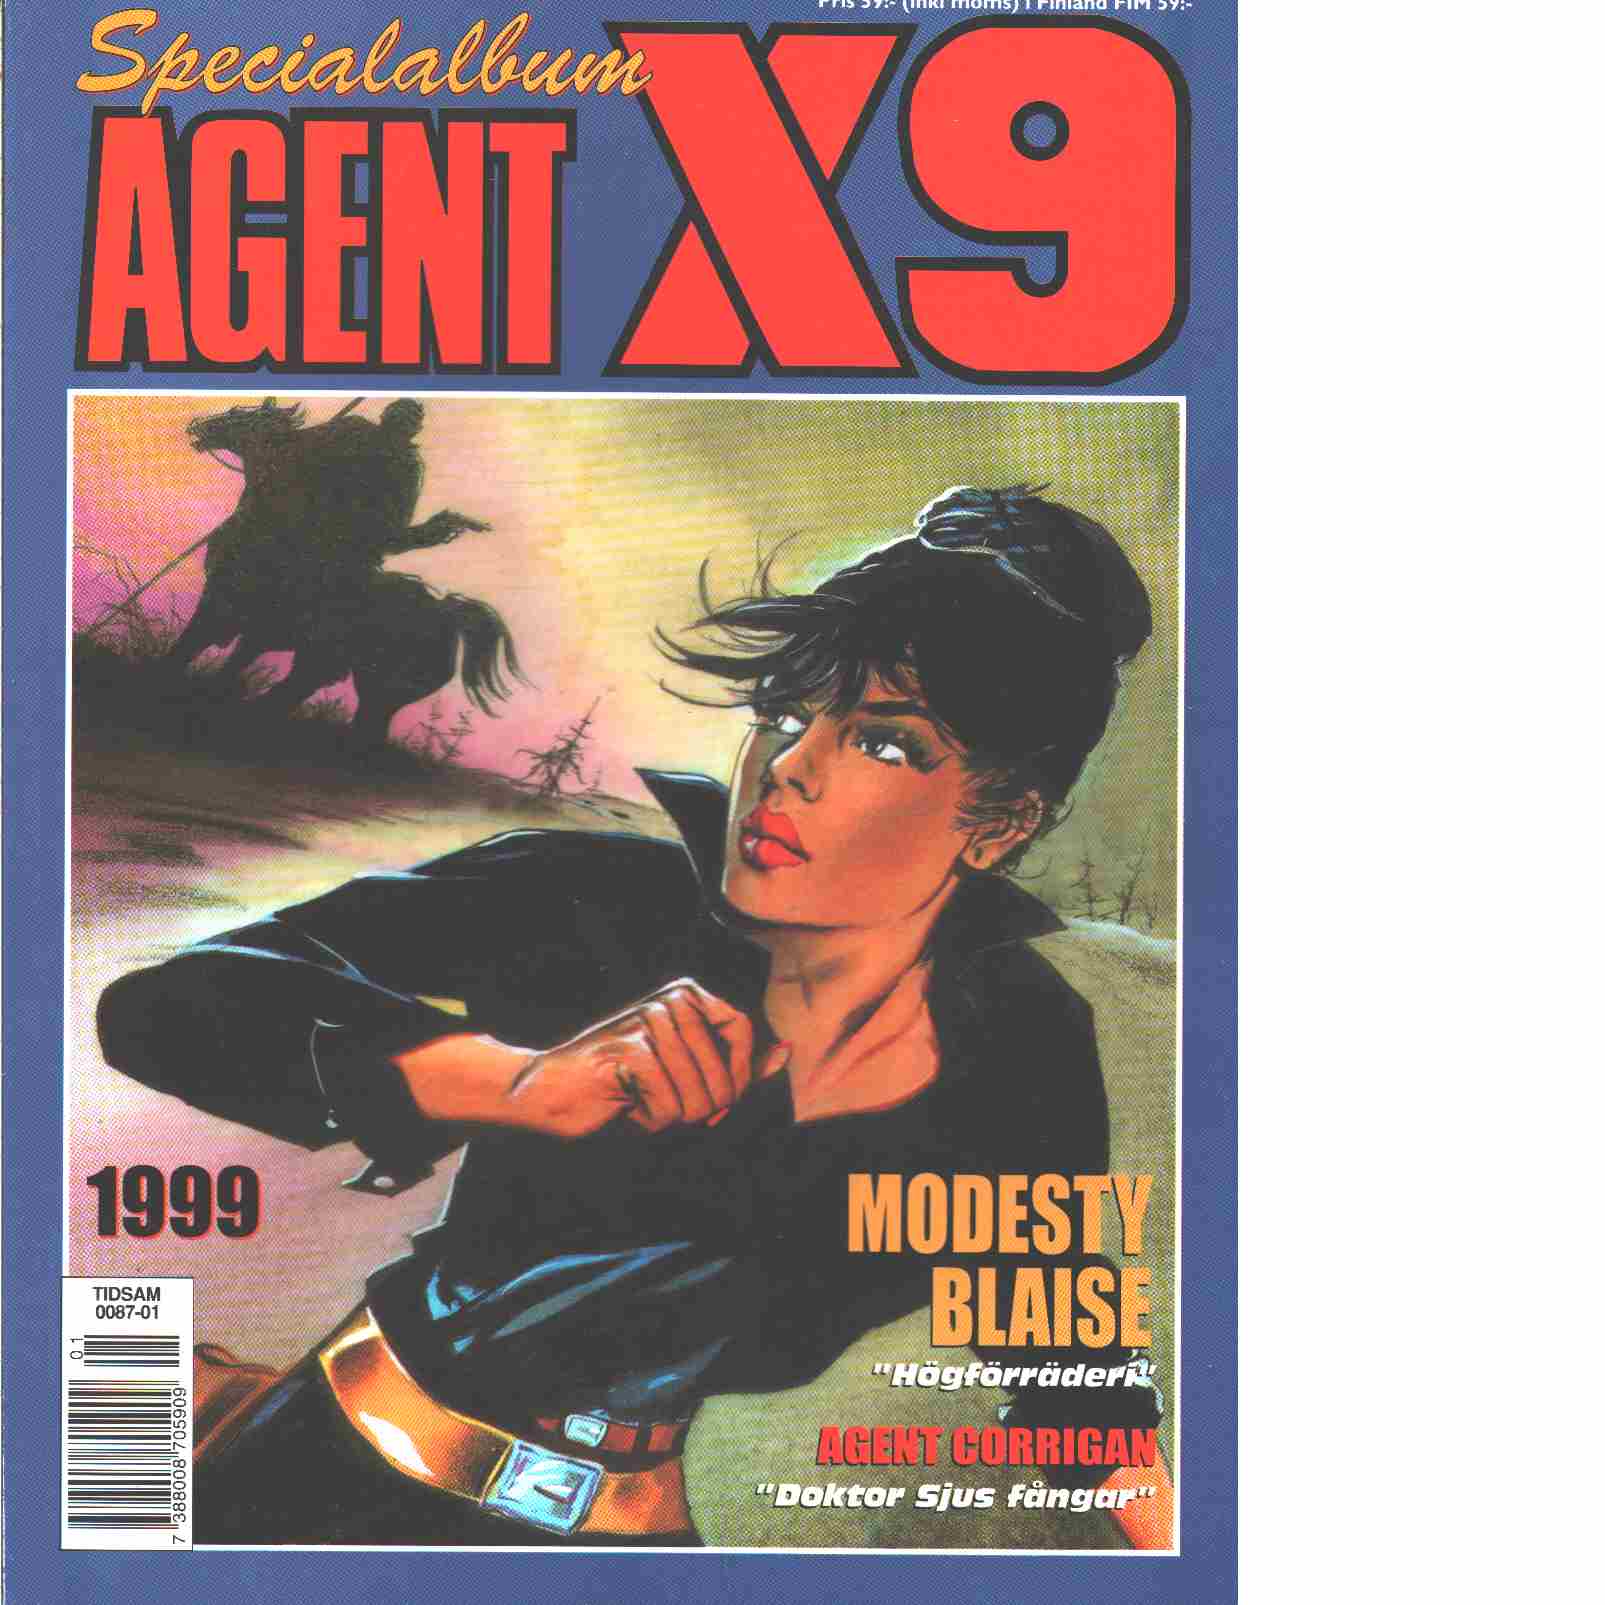 Agent X9 Specialalbum Modesty Blaise - Red.